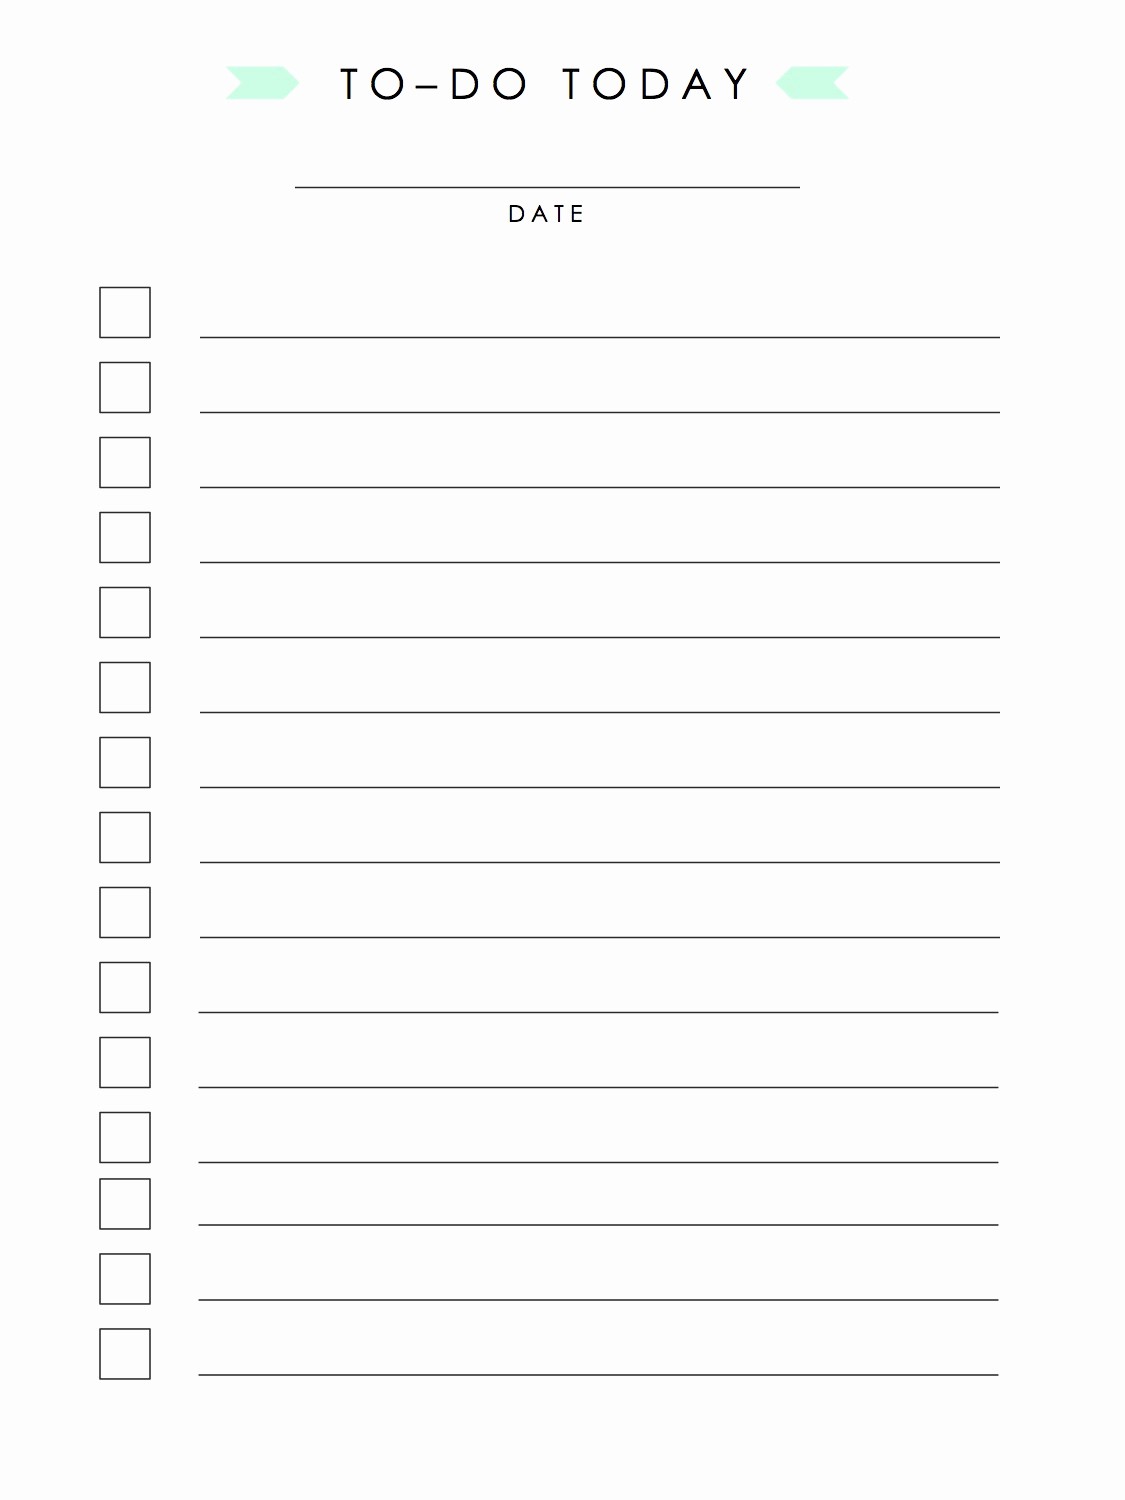 Today to Do List Template Awesome Thursday Freebie to Do List Template — Lindsay Scholz